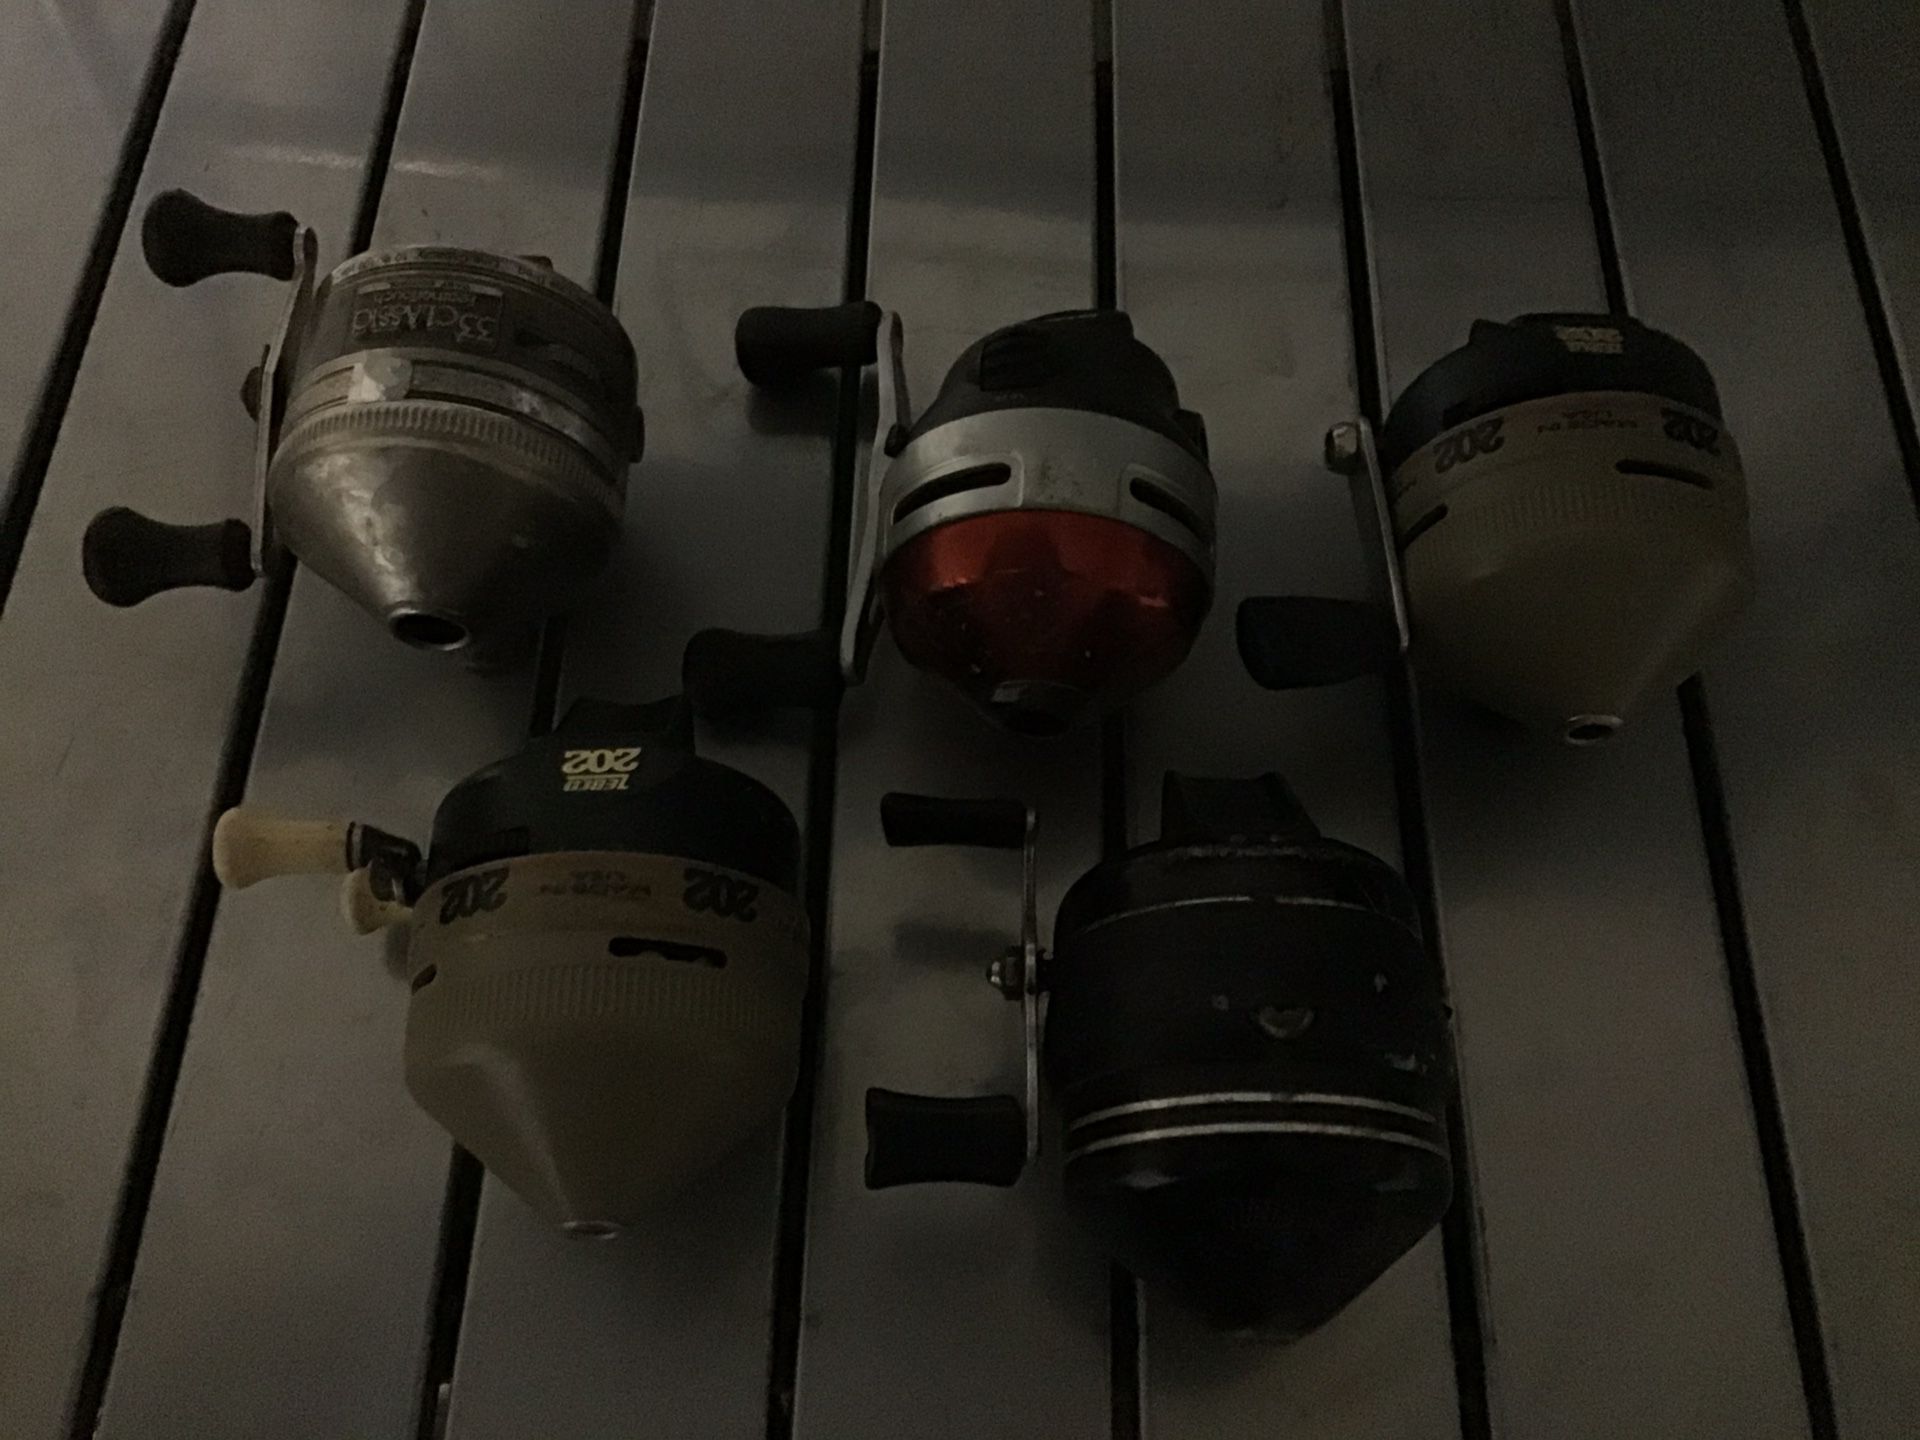 Five fishing reels for 30.00